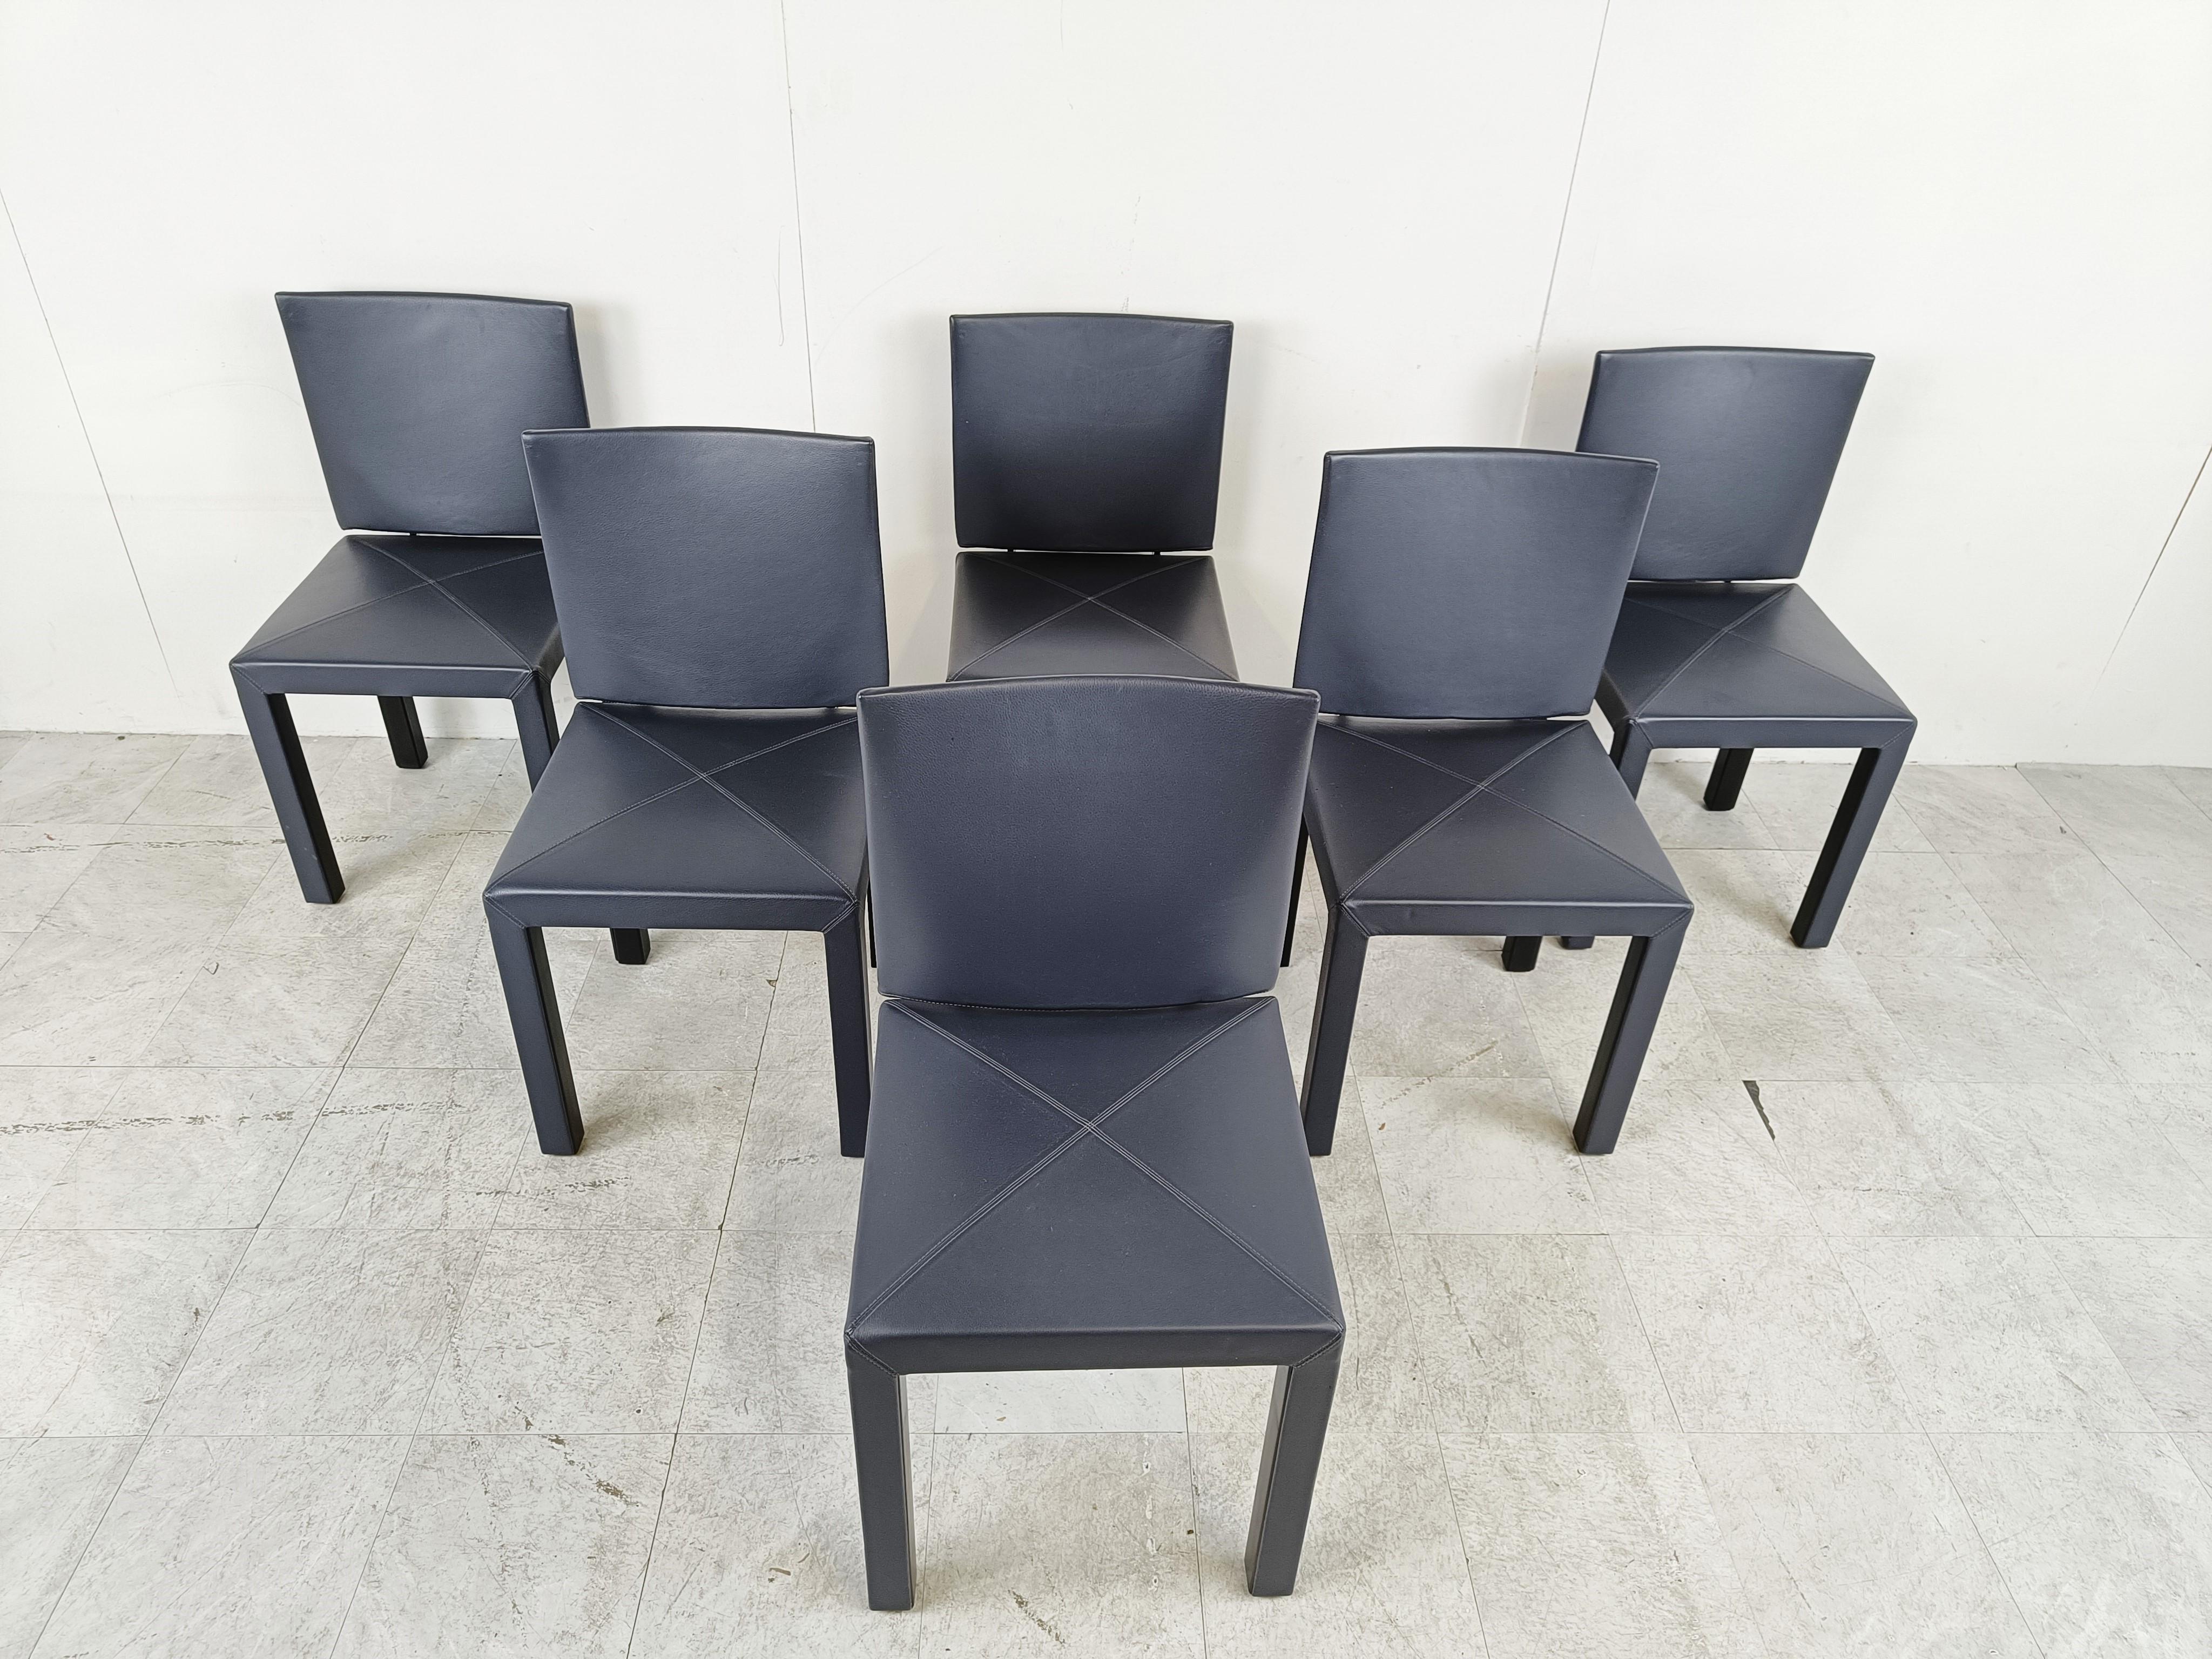 Set of 6 Arcara dining chairs designed by Paolo Piva for B& B italia's Arcadia series.

Upholstered in dark grey leather.

They are very comfortable and the angle of the backrests can be slightly adjusted.

Good condition

1980s -